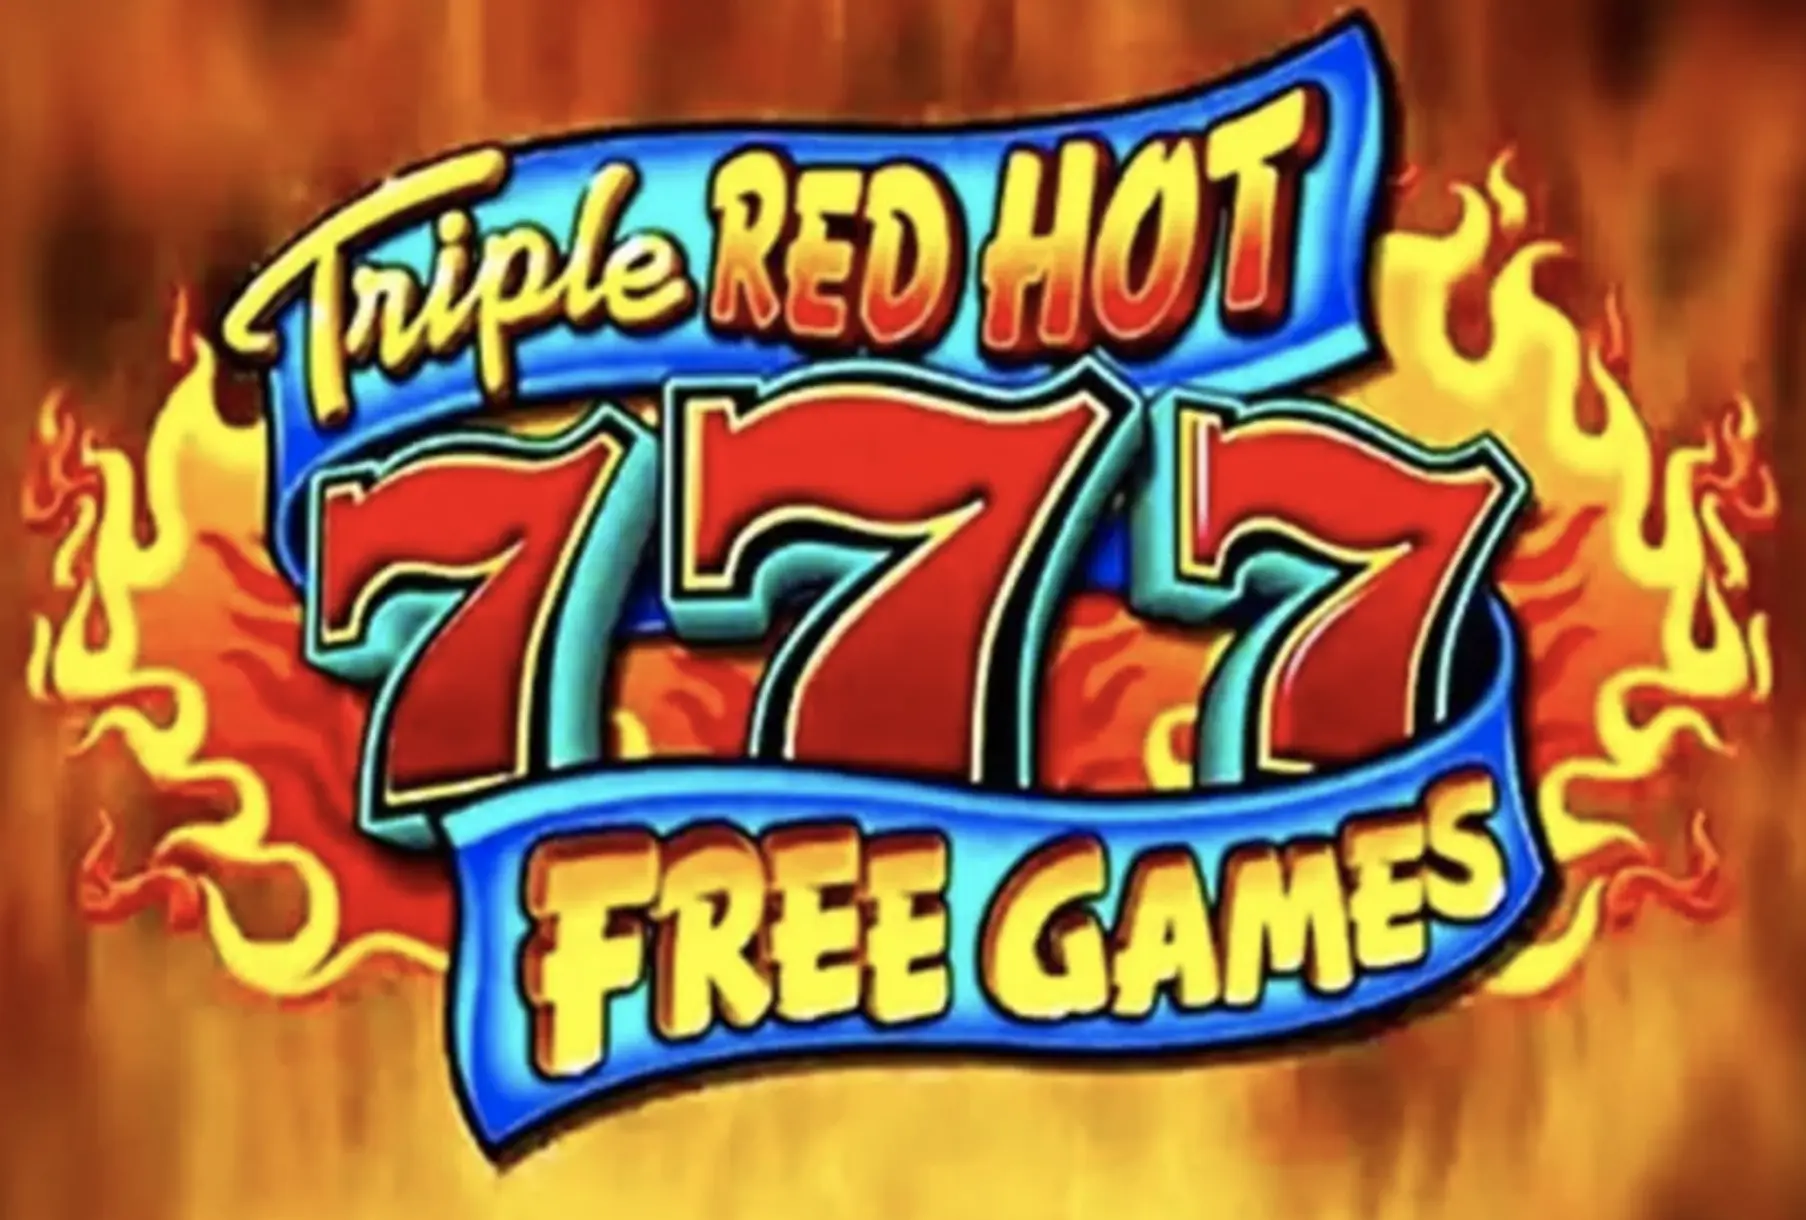 Triple Red Hot 777 Slot